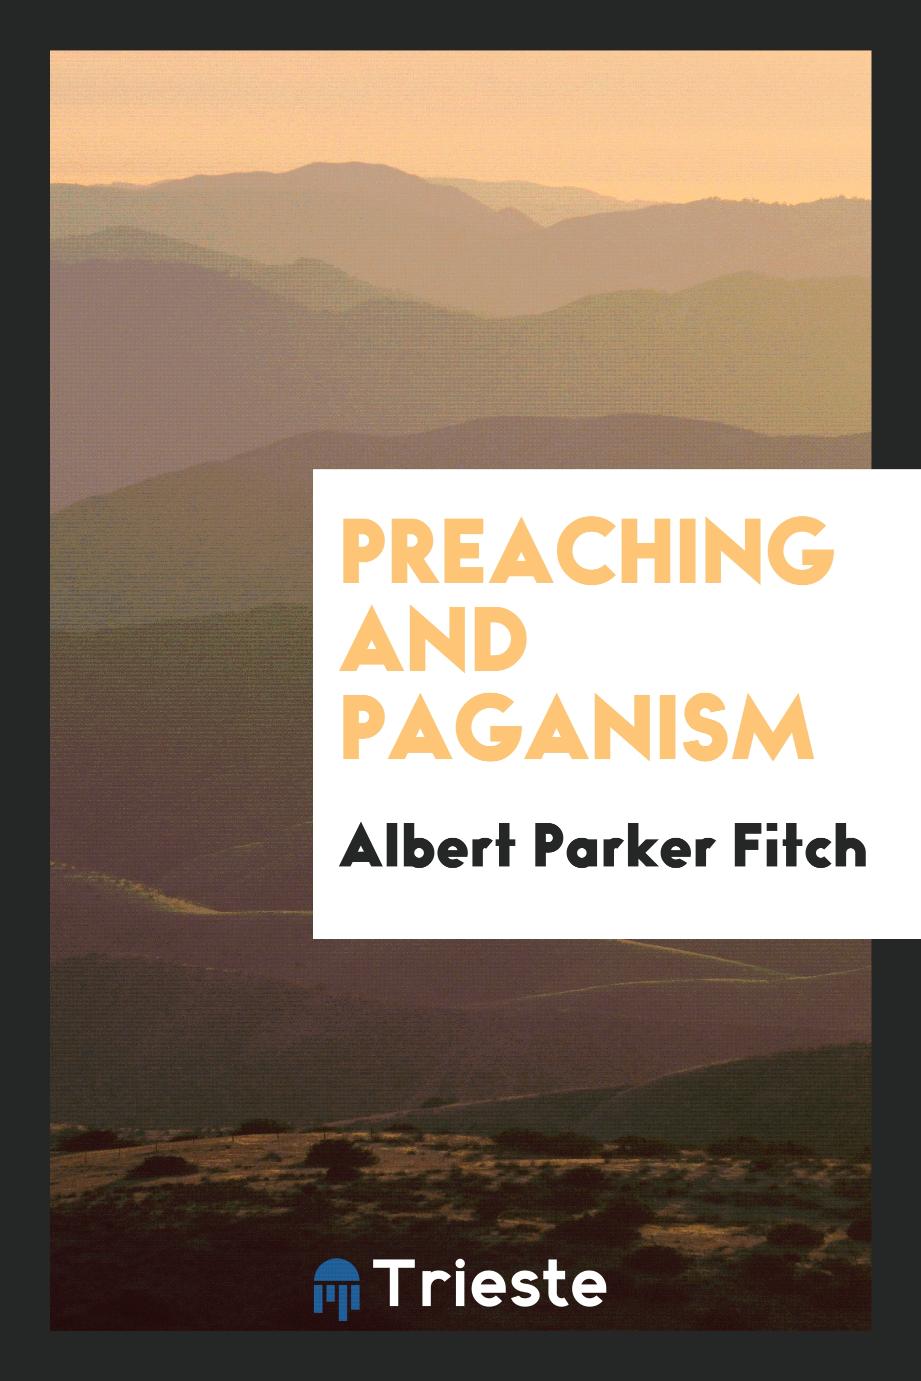 Preaching and paganism